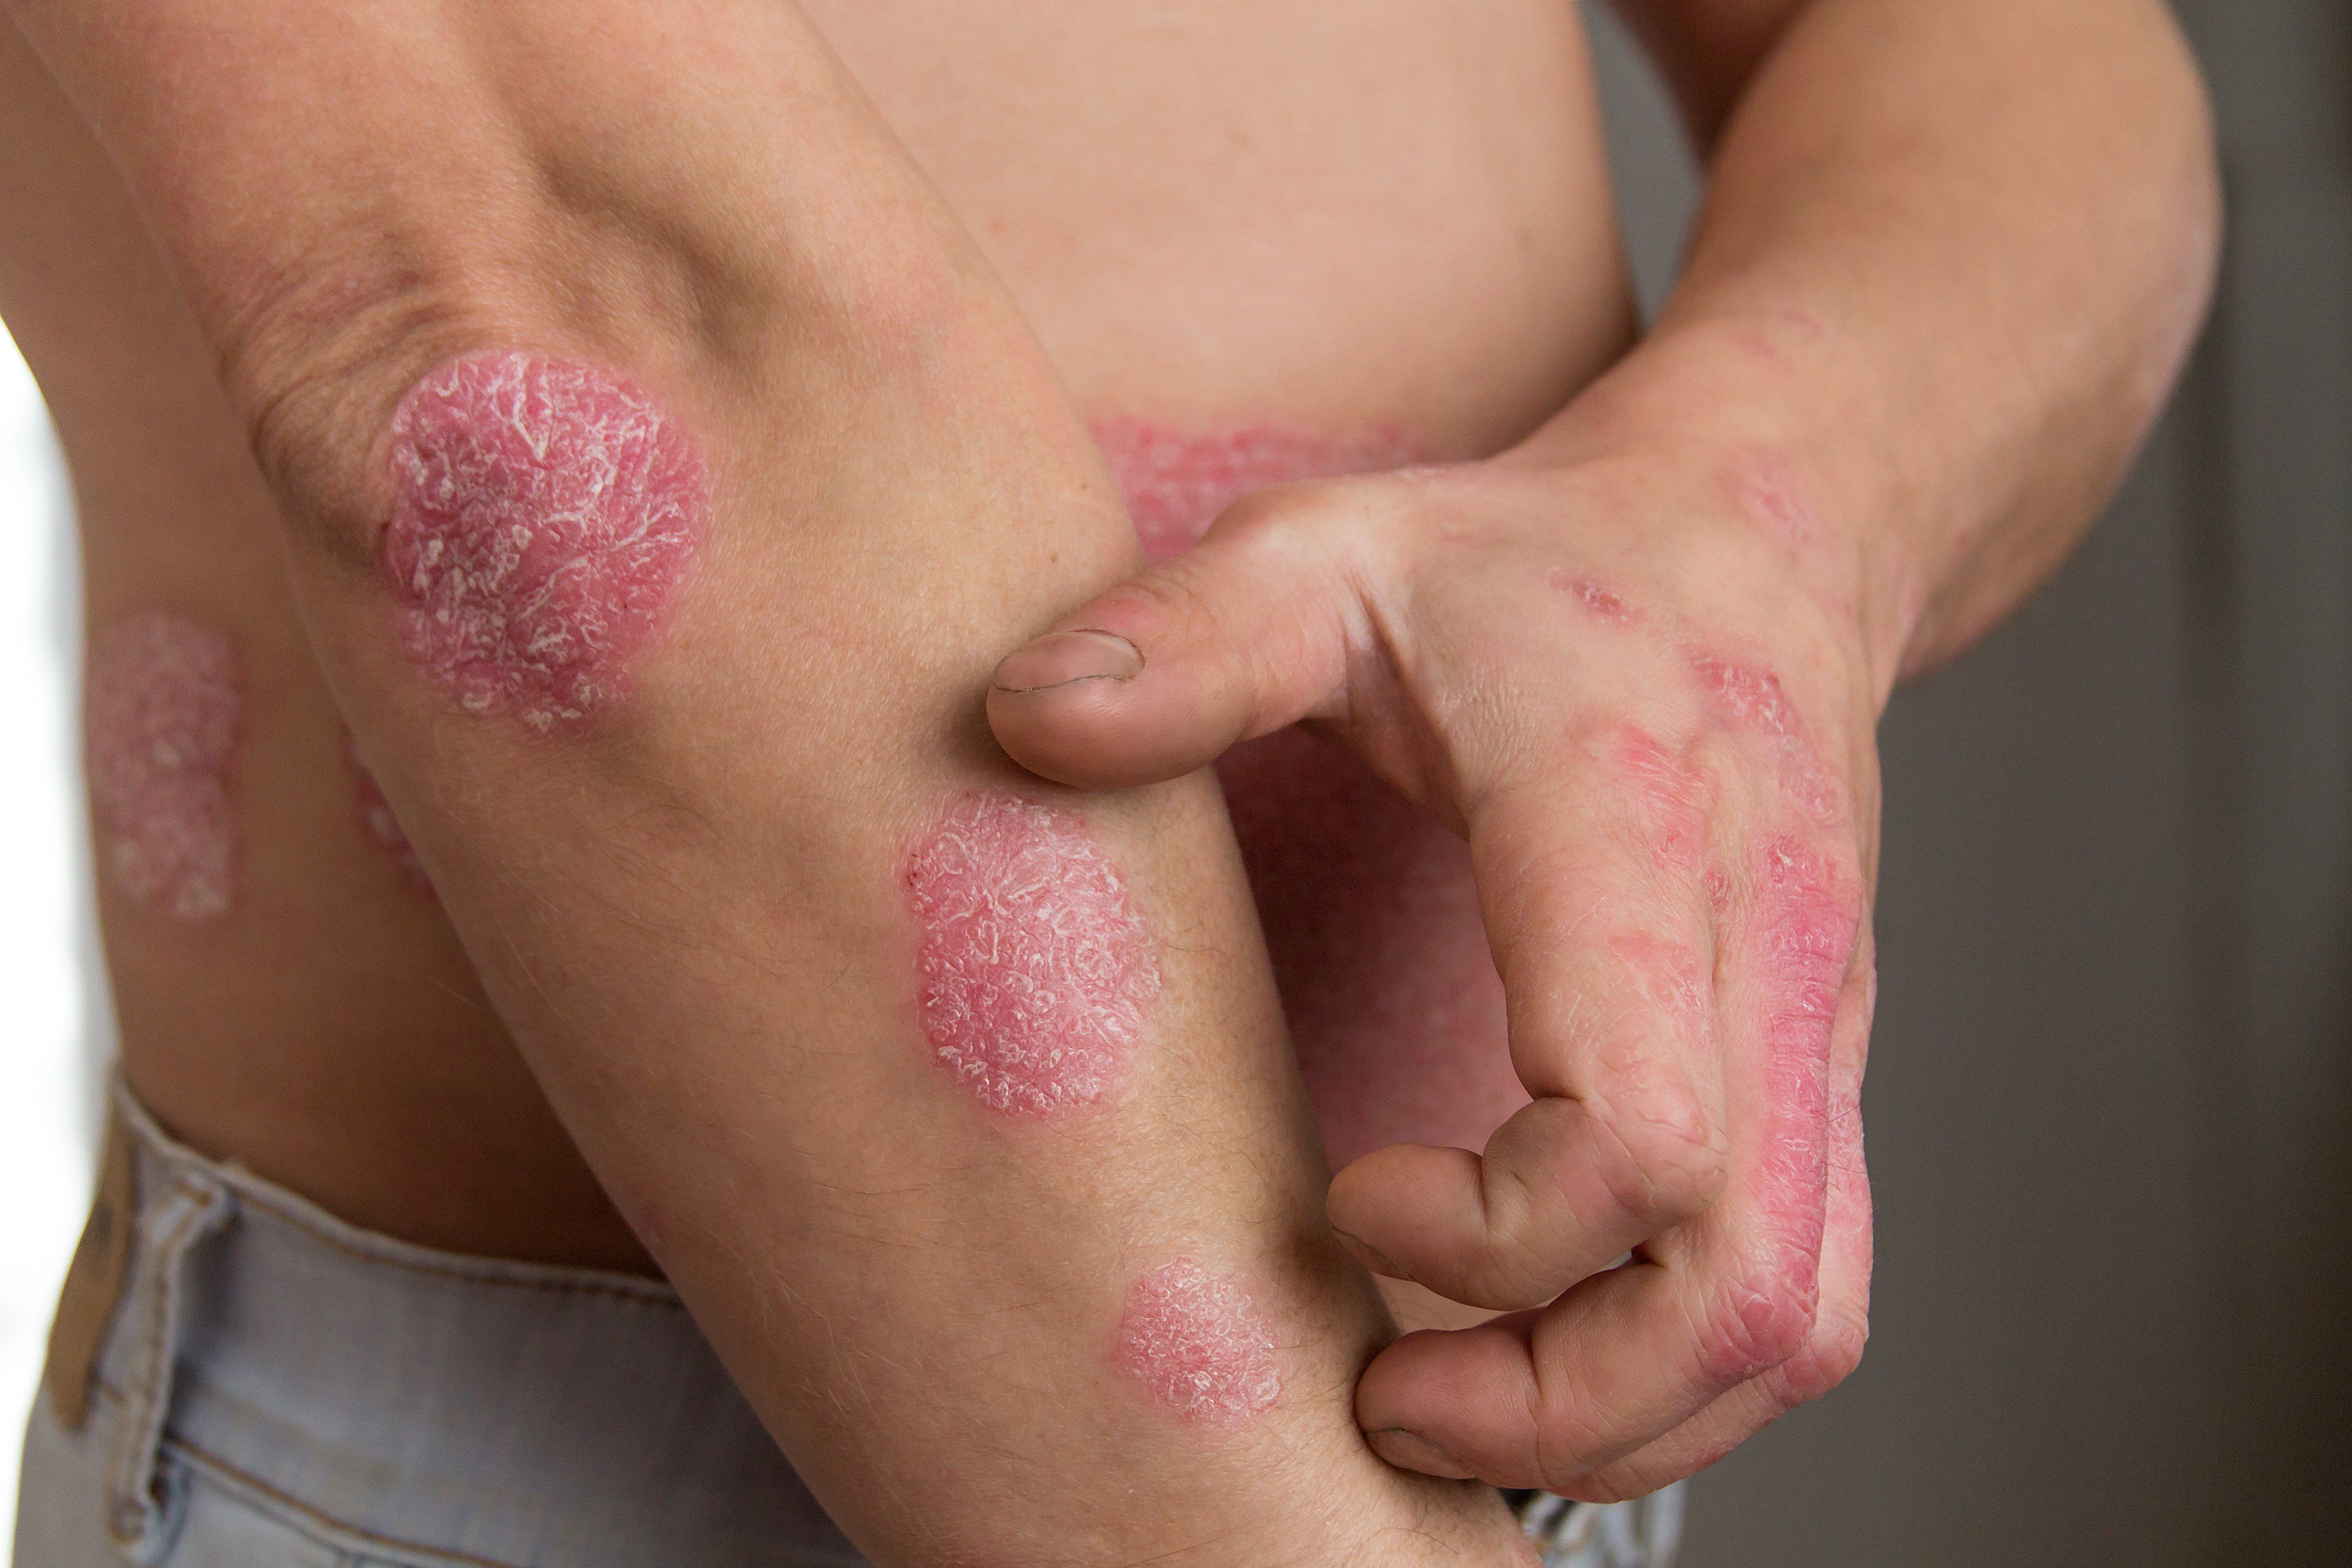 persons scratching patches or red, flaky skin (psoriasis)